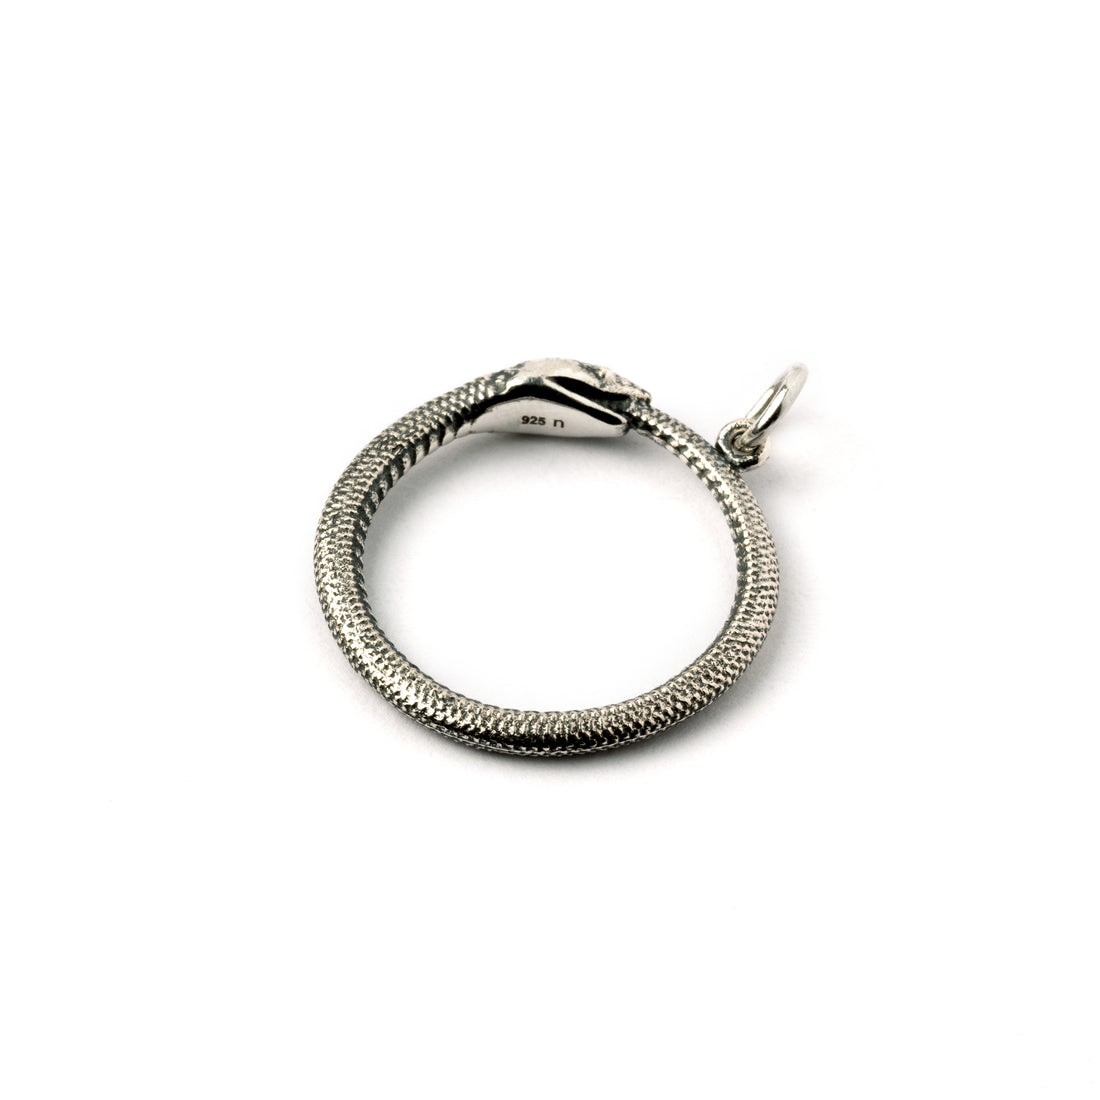 Silver Ouroboros Pendant necklace charm back side view 